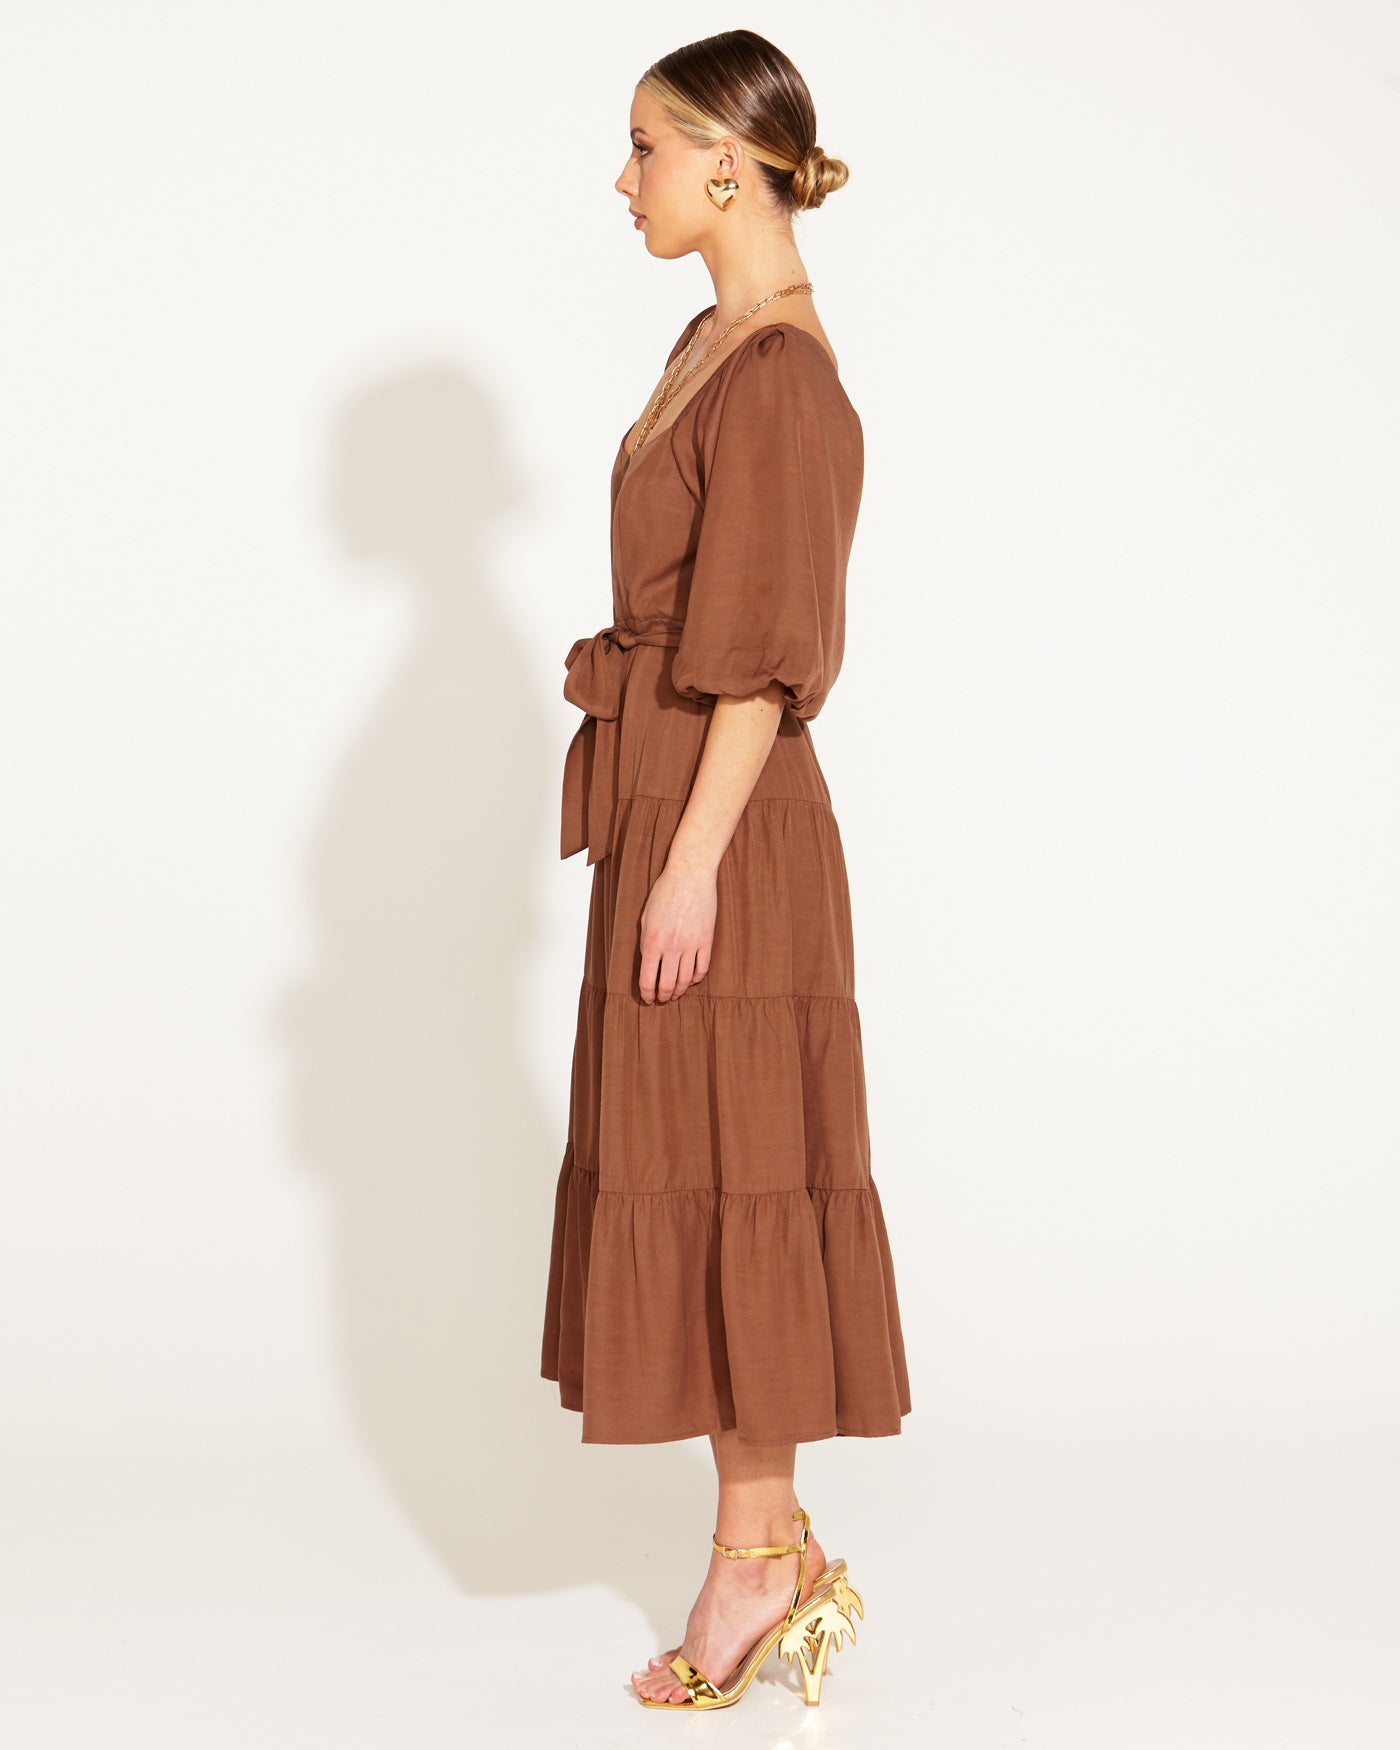 Fate+Becker One And Only Tiered Midi Dress - Mocha